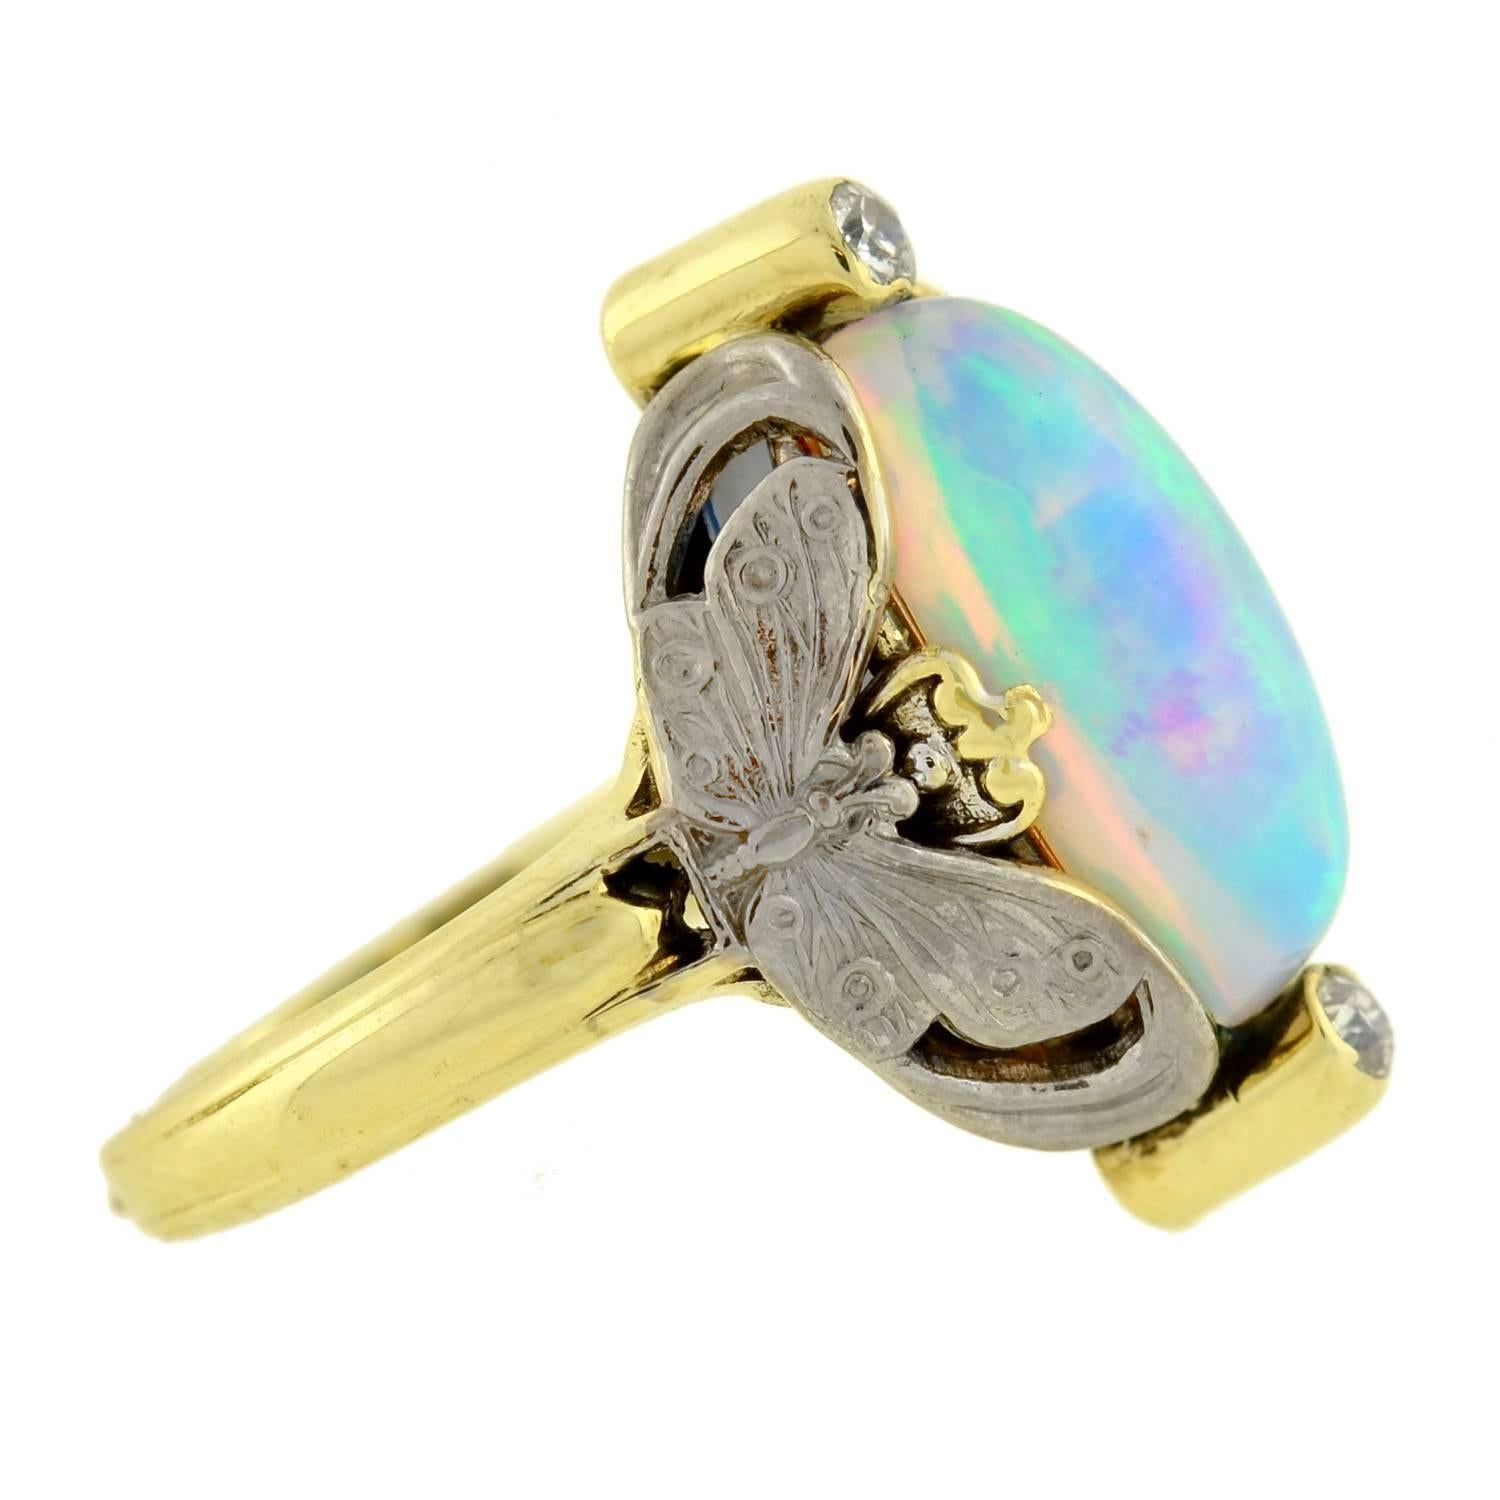 Although a portion of the world's opals are mined in Ethiopa, most originate in Australia- particularly from a region known as 